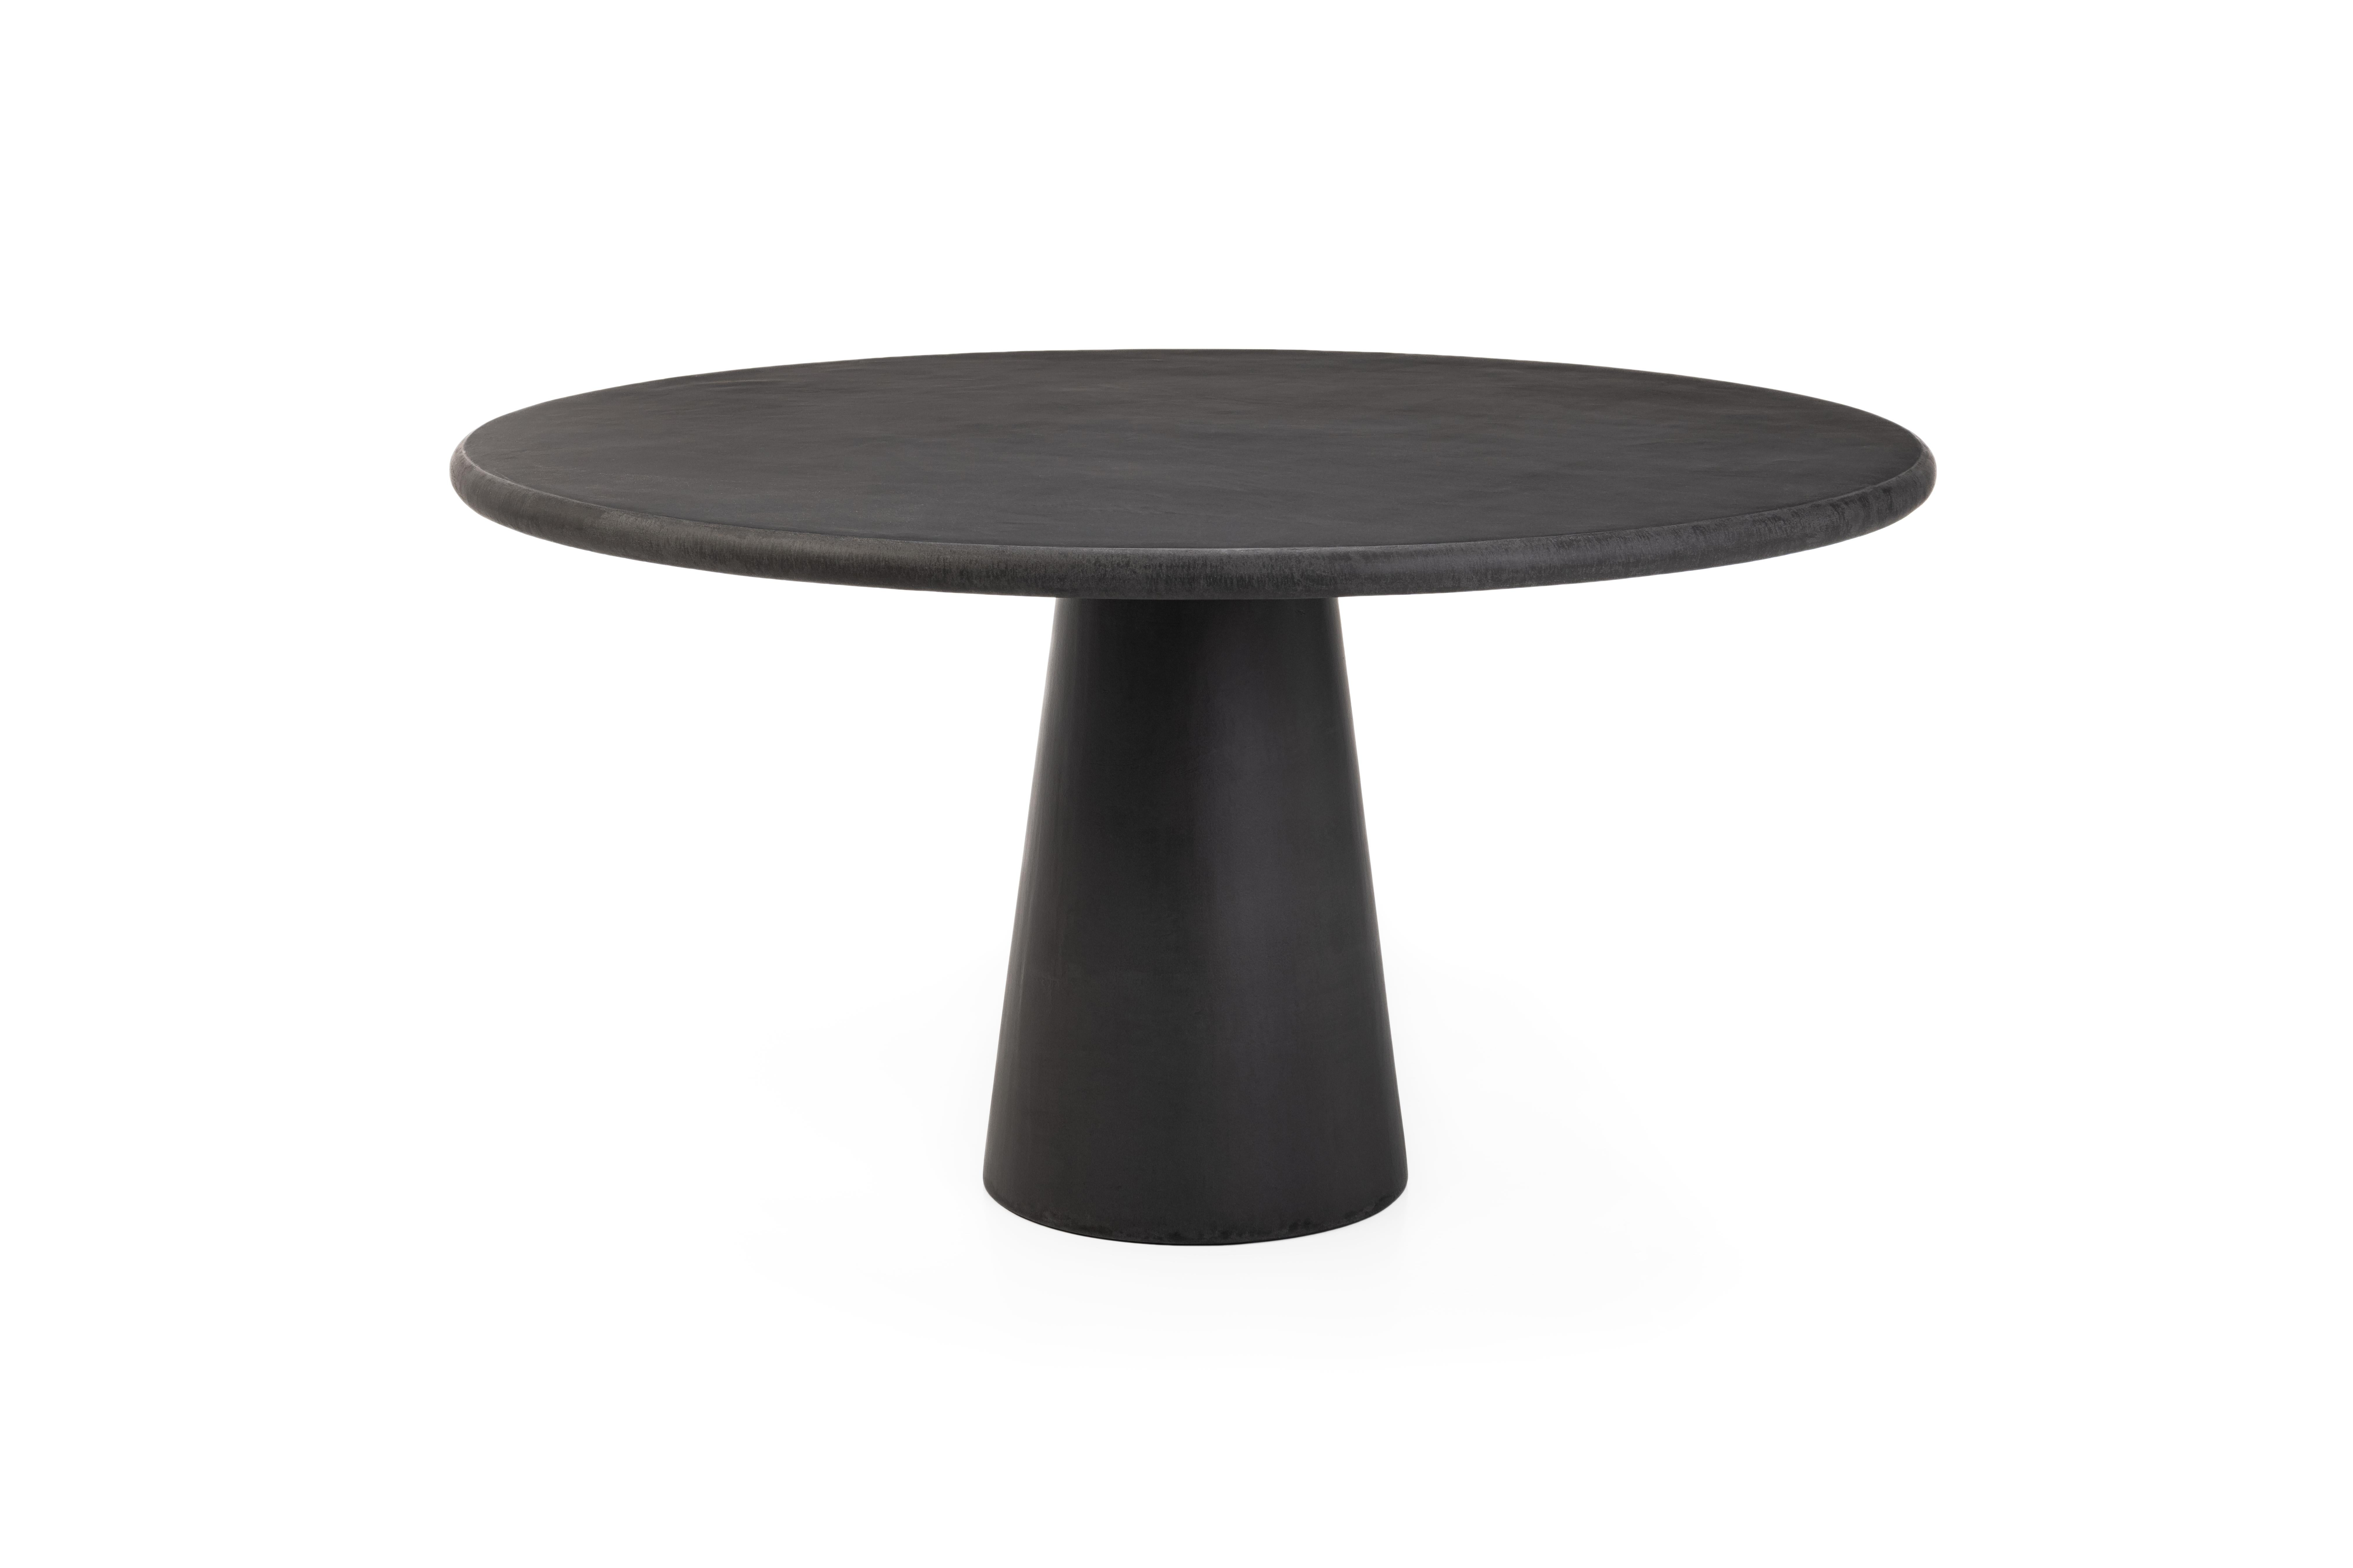 Contemporary Belgian design / Handcrafted / Organic shape / Ecological material / Natural lime plaster / Concrete look / Made on demand

Color pictures: BM57 Makala Intense

The Cone dining table is handcrafted with multiple layers Mortex® on a